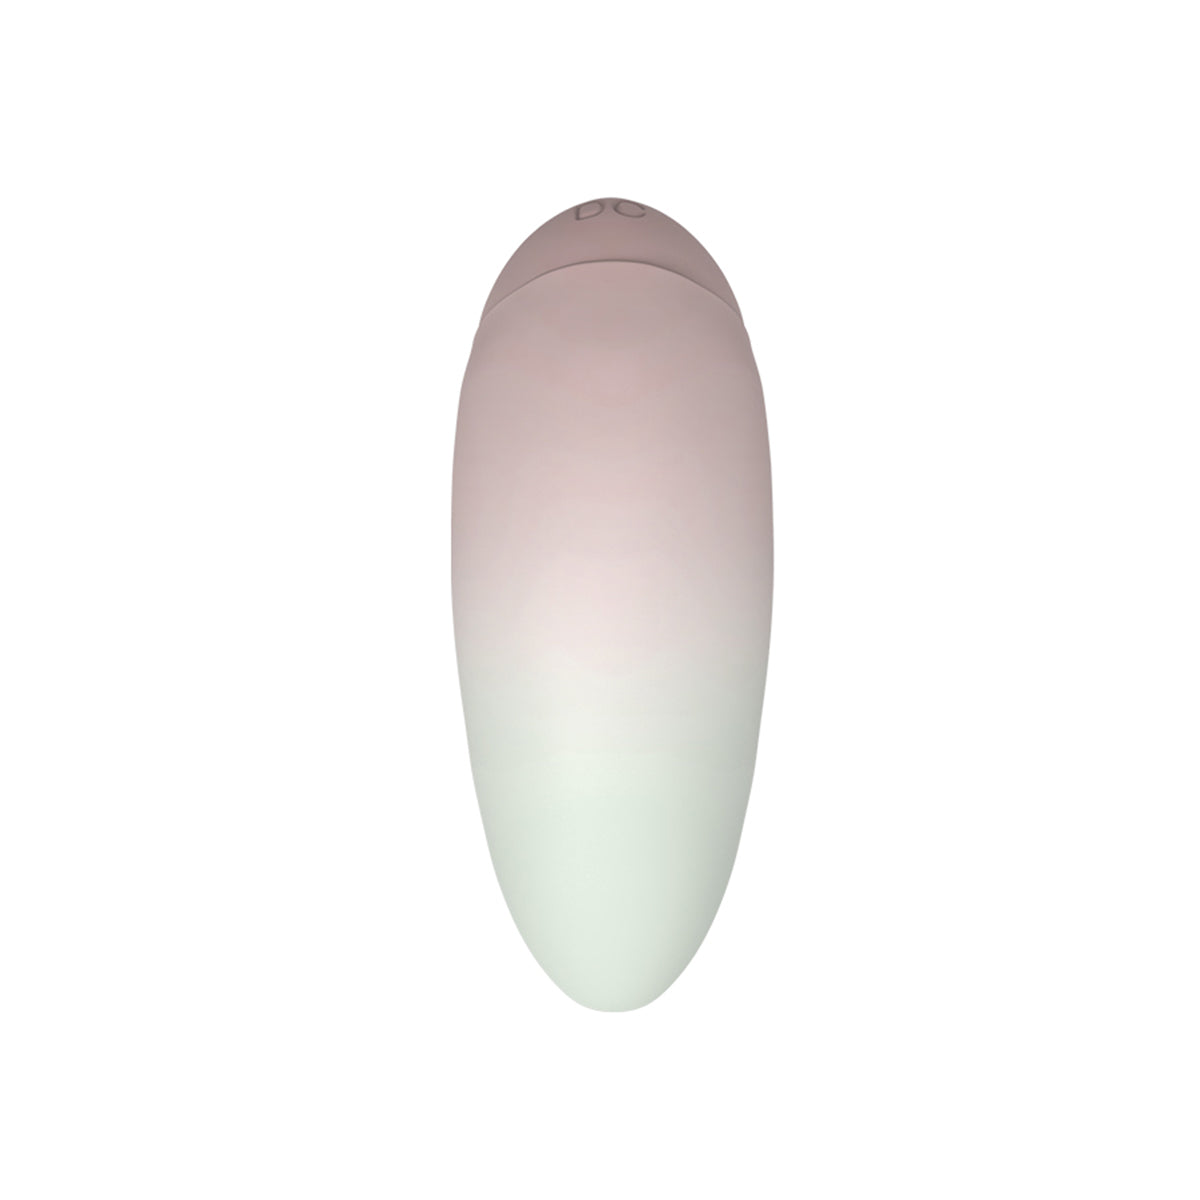 Knjy Silicone Rechargeable Wearable VibeknjyshopKnjy Silicone Rechargeable Wearable Vibe